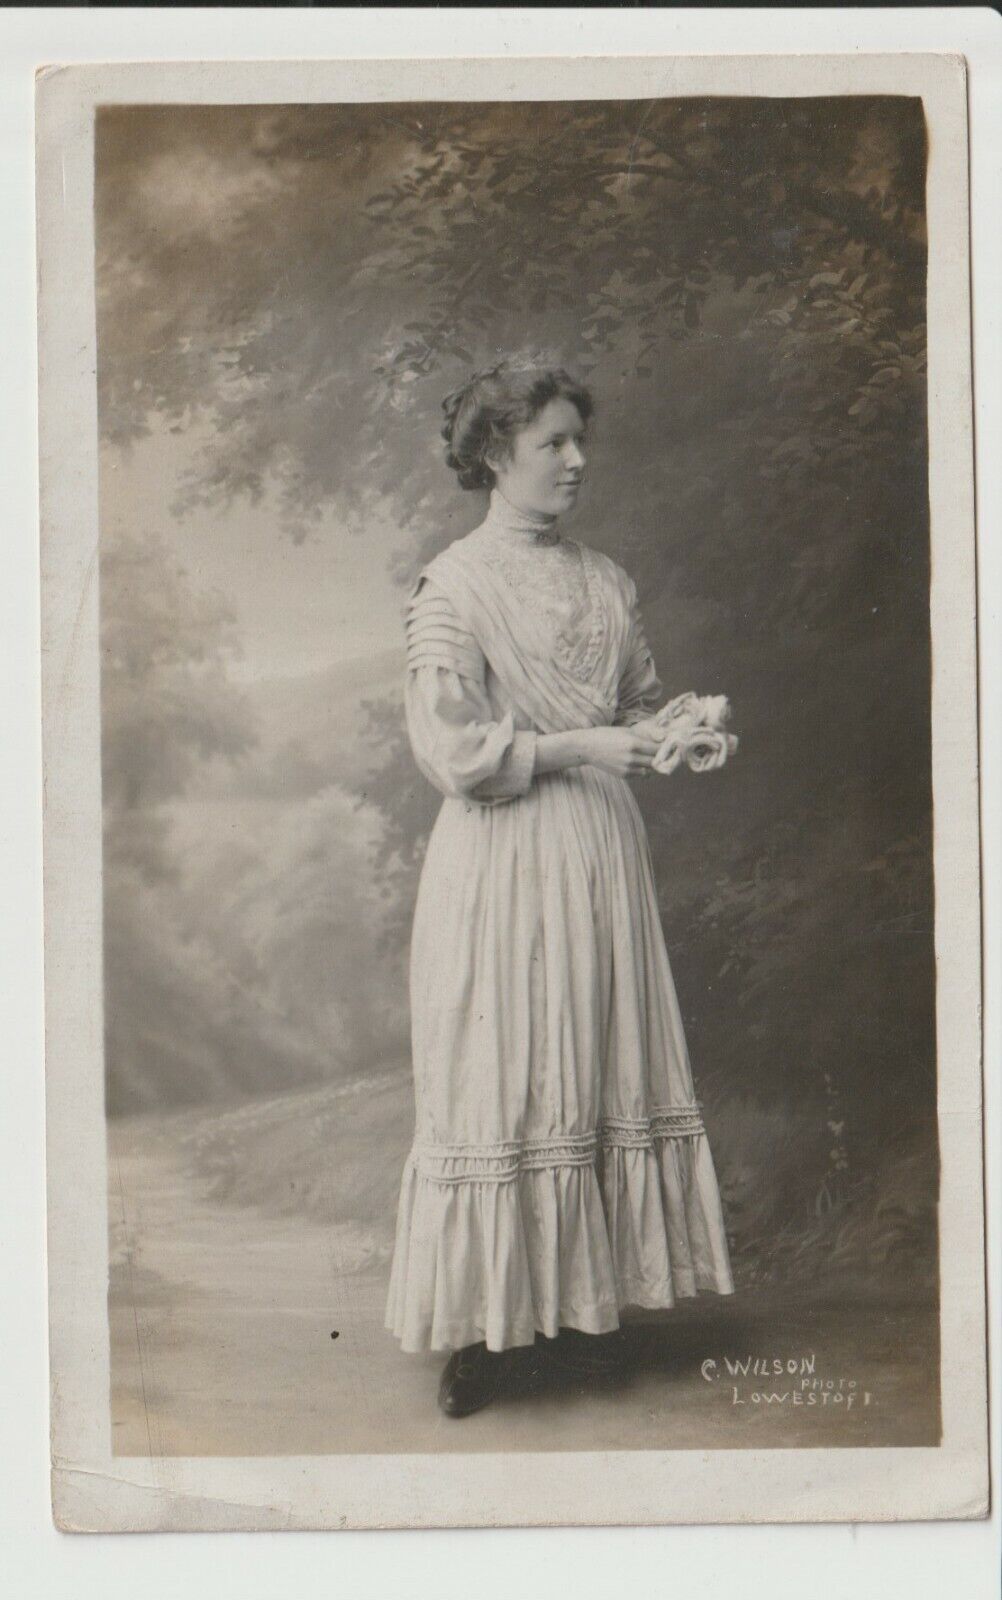 RPPC A Lady by C Wilson Lowestoft England United Kingdom UK Real Photo UN-POSTED